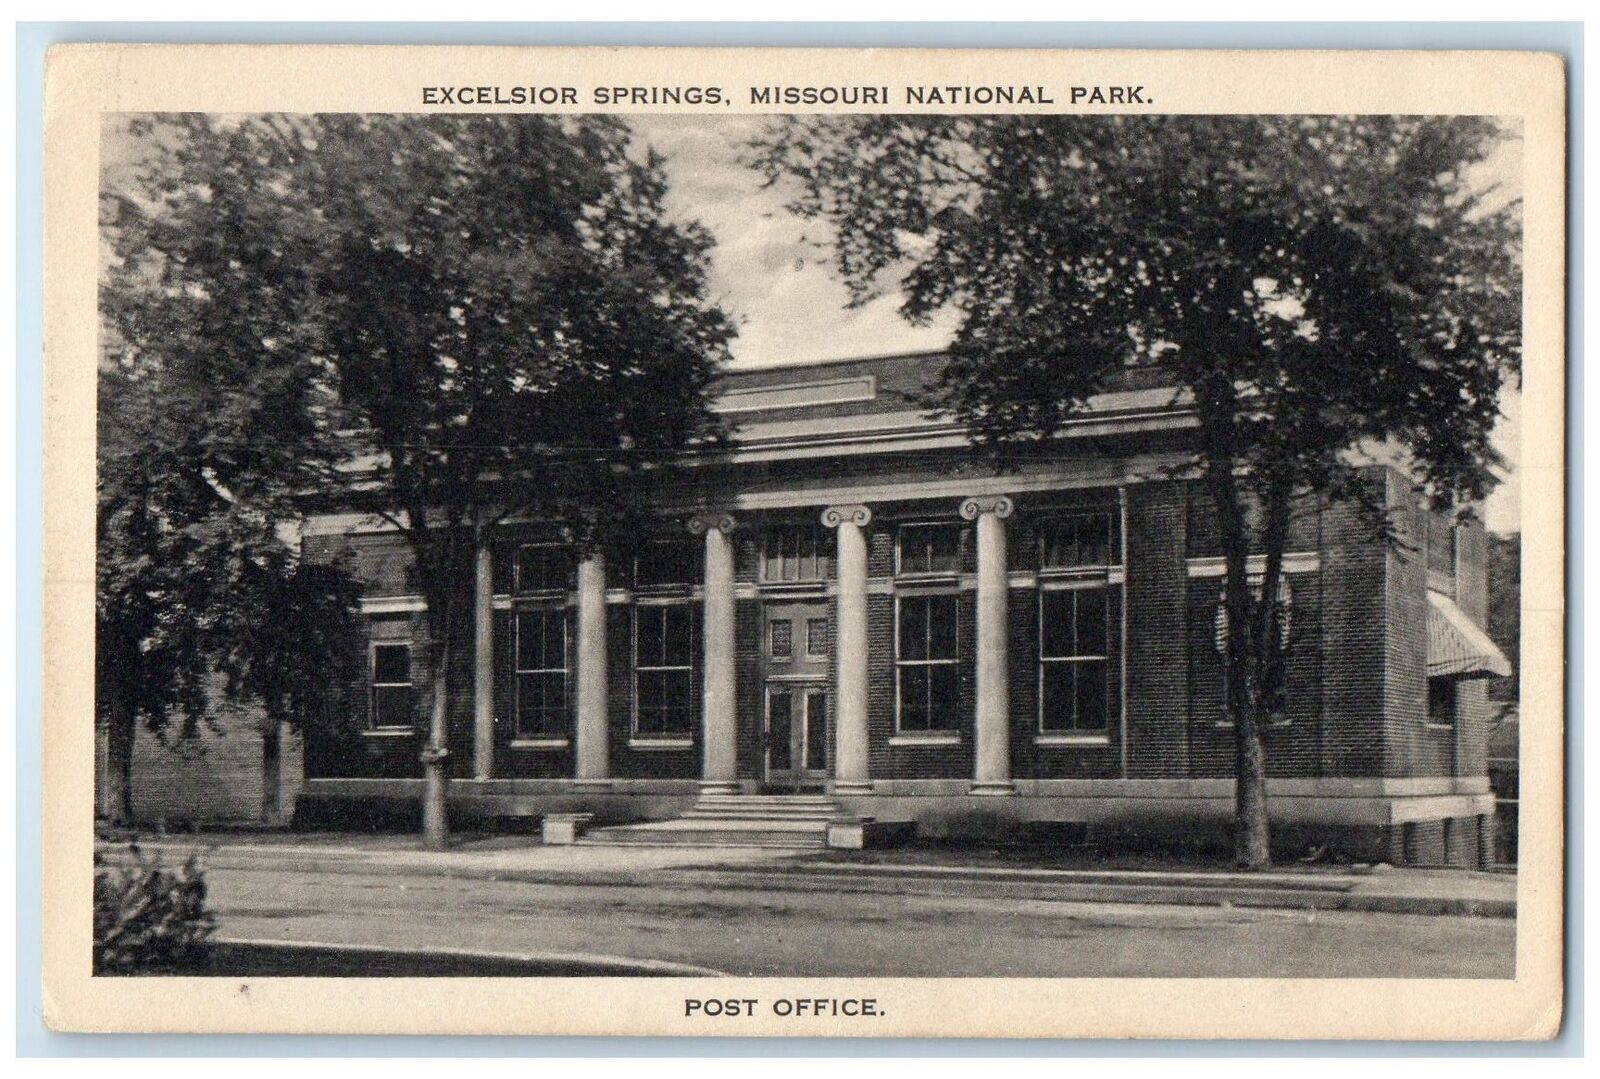 c1920 Post Office Excelsior Springs Missouri National Park MO Unposted Postcard